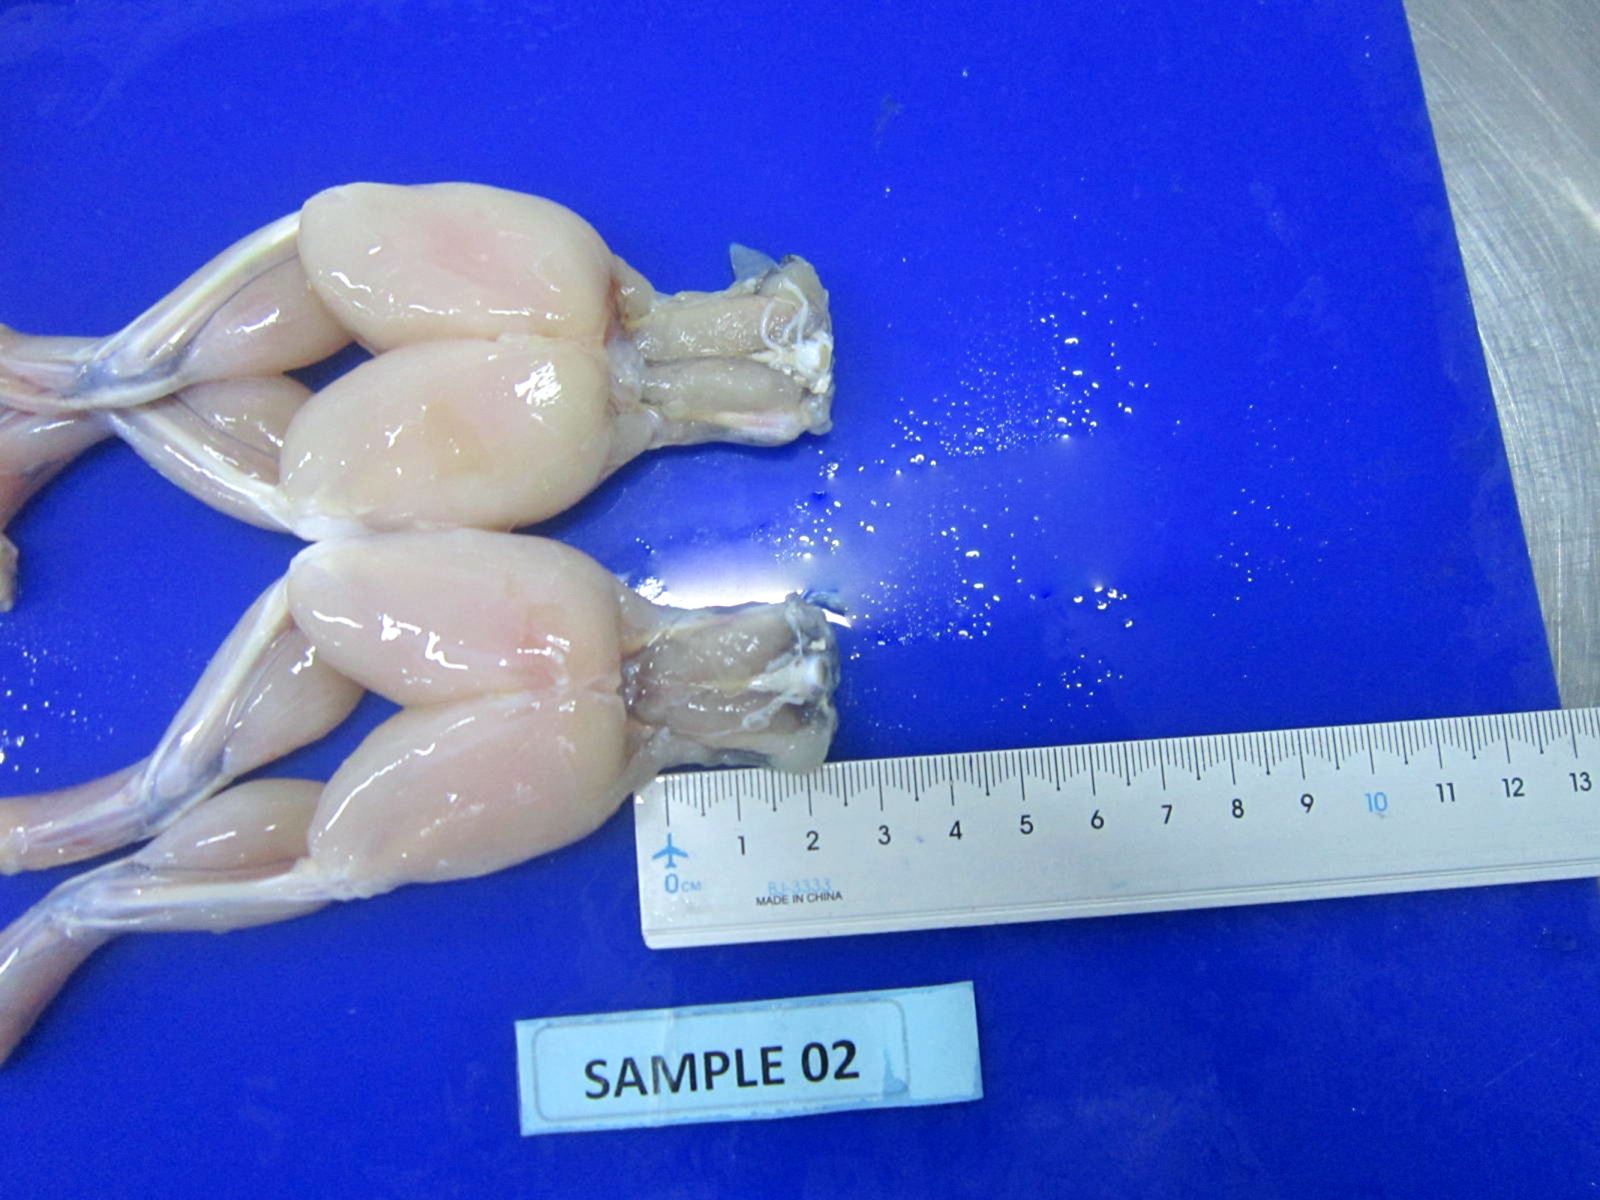 Measuring The Length Of The Saddle Of Each Pair Of Frog Legs